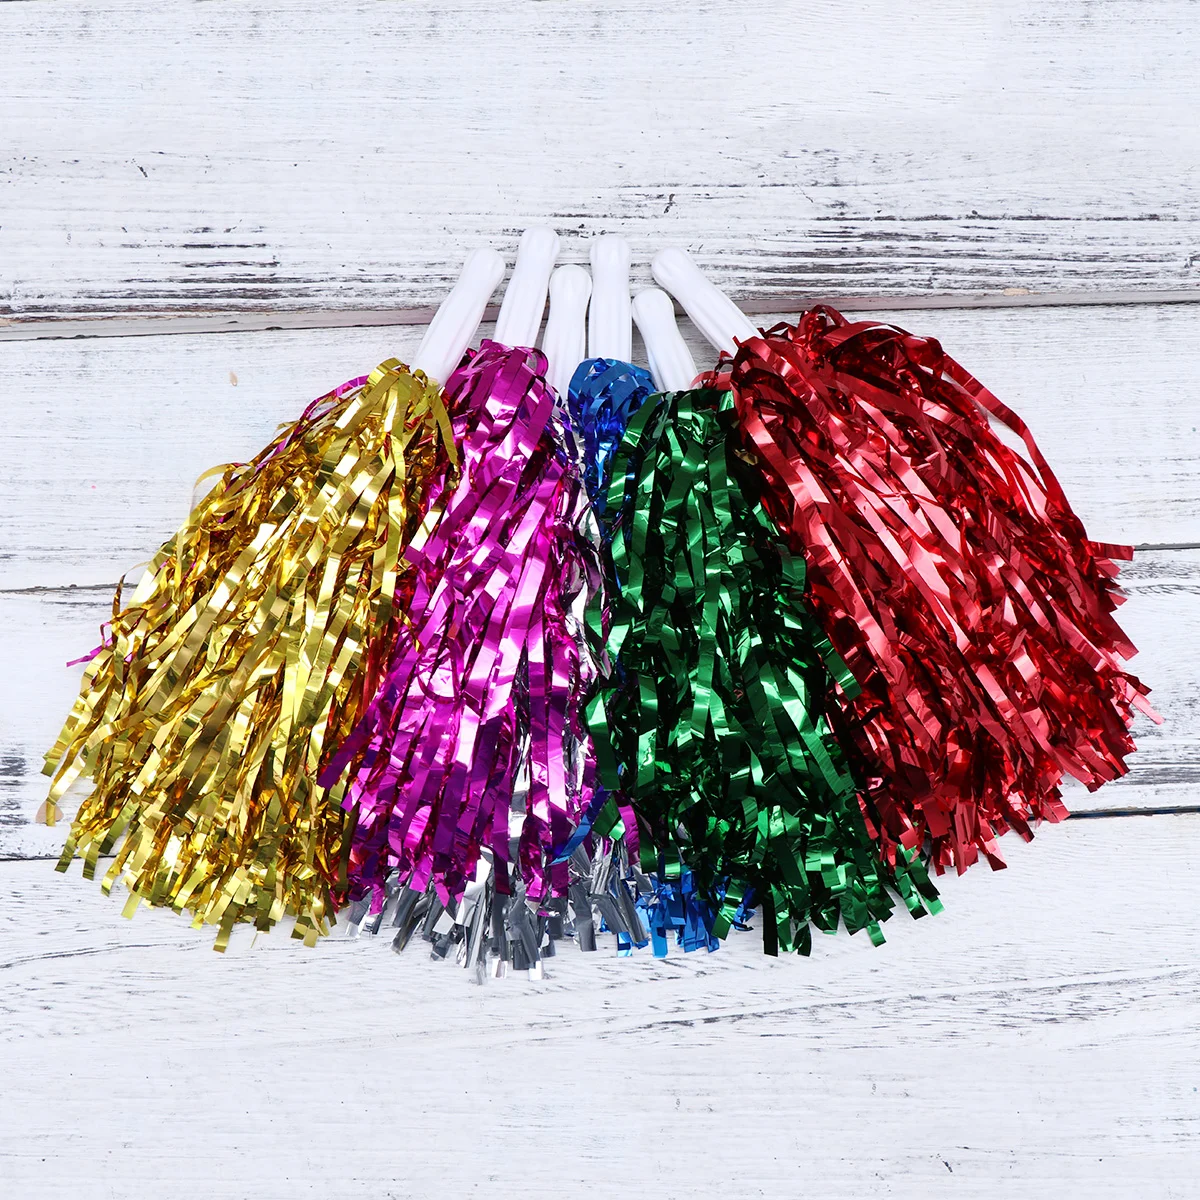 

12PCS Straight Handle Cheering Poms Cheerleading Kit Cheer Props for Performance Competition Cheering Sports Events (Random